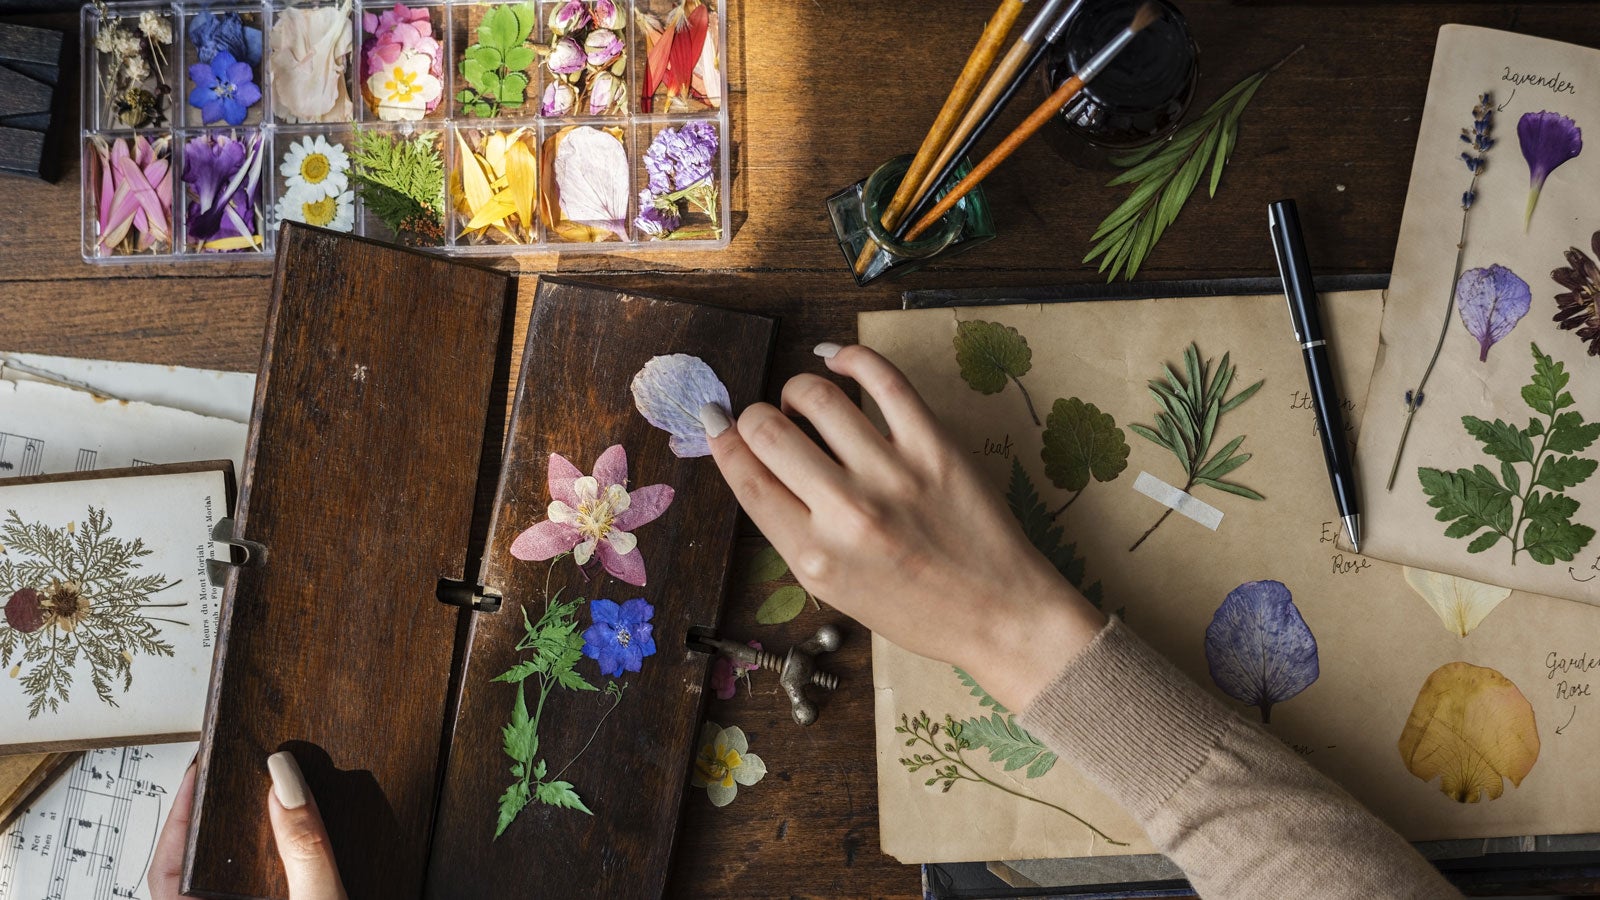 Photograph of a person at a crafting table removing pressed flowers from a flower press